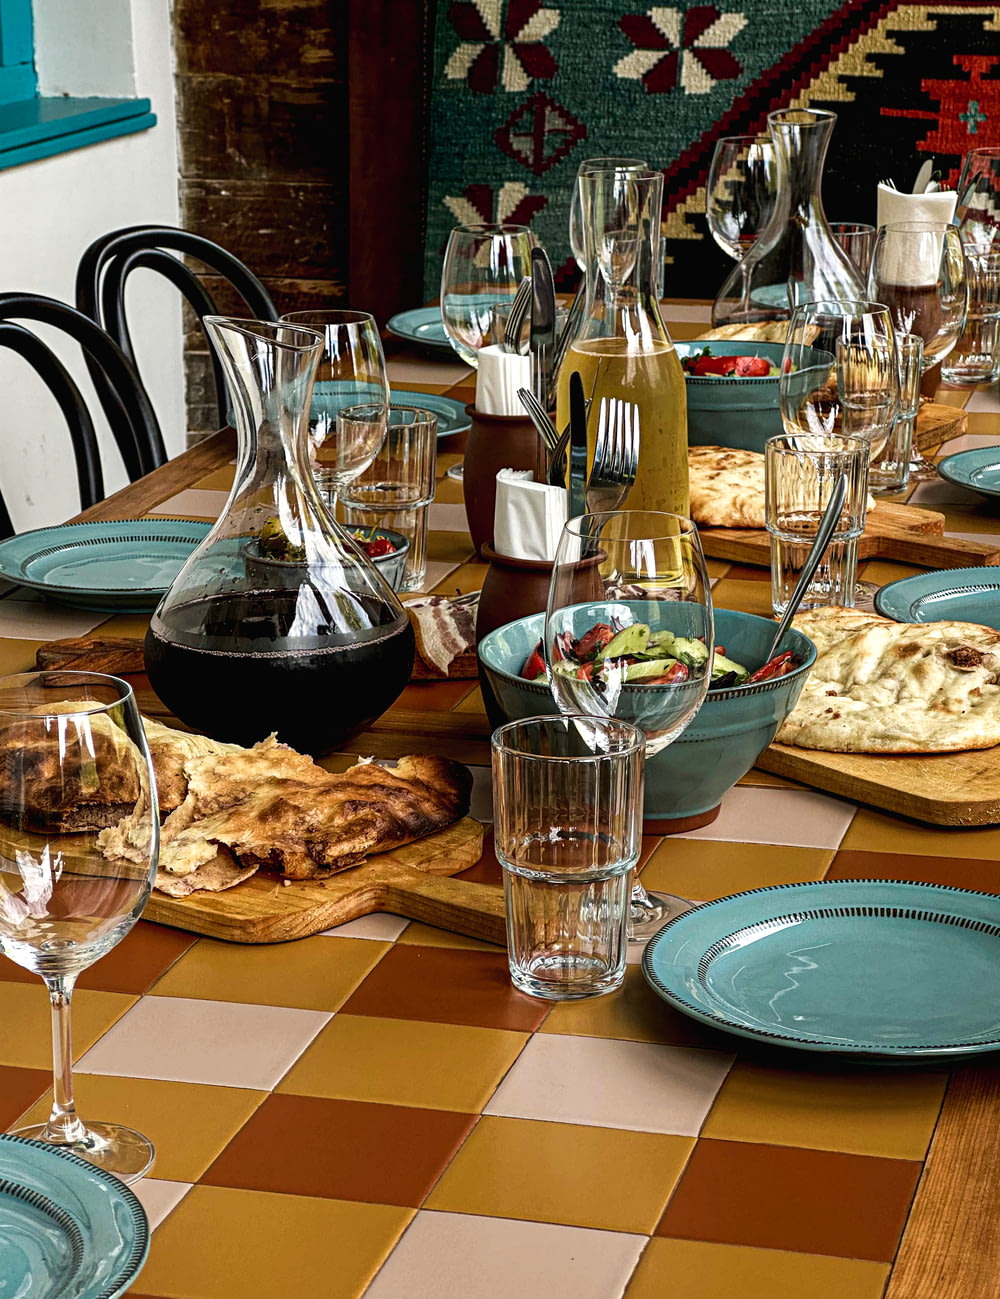 a table with many dishes and glasses on it